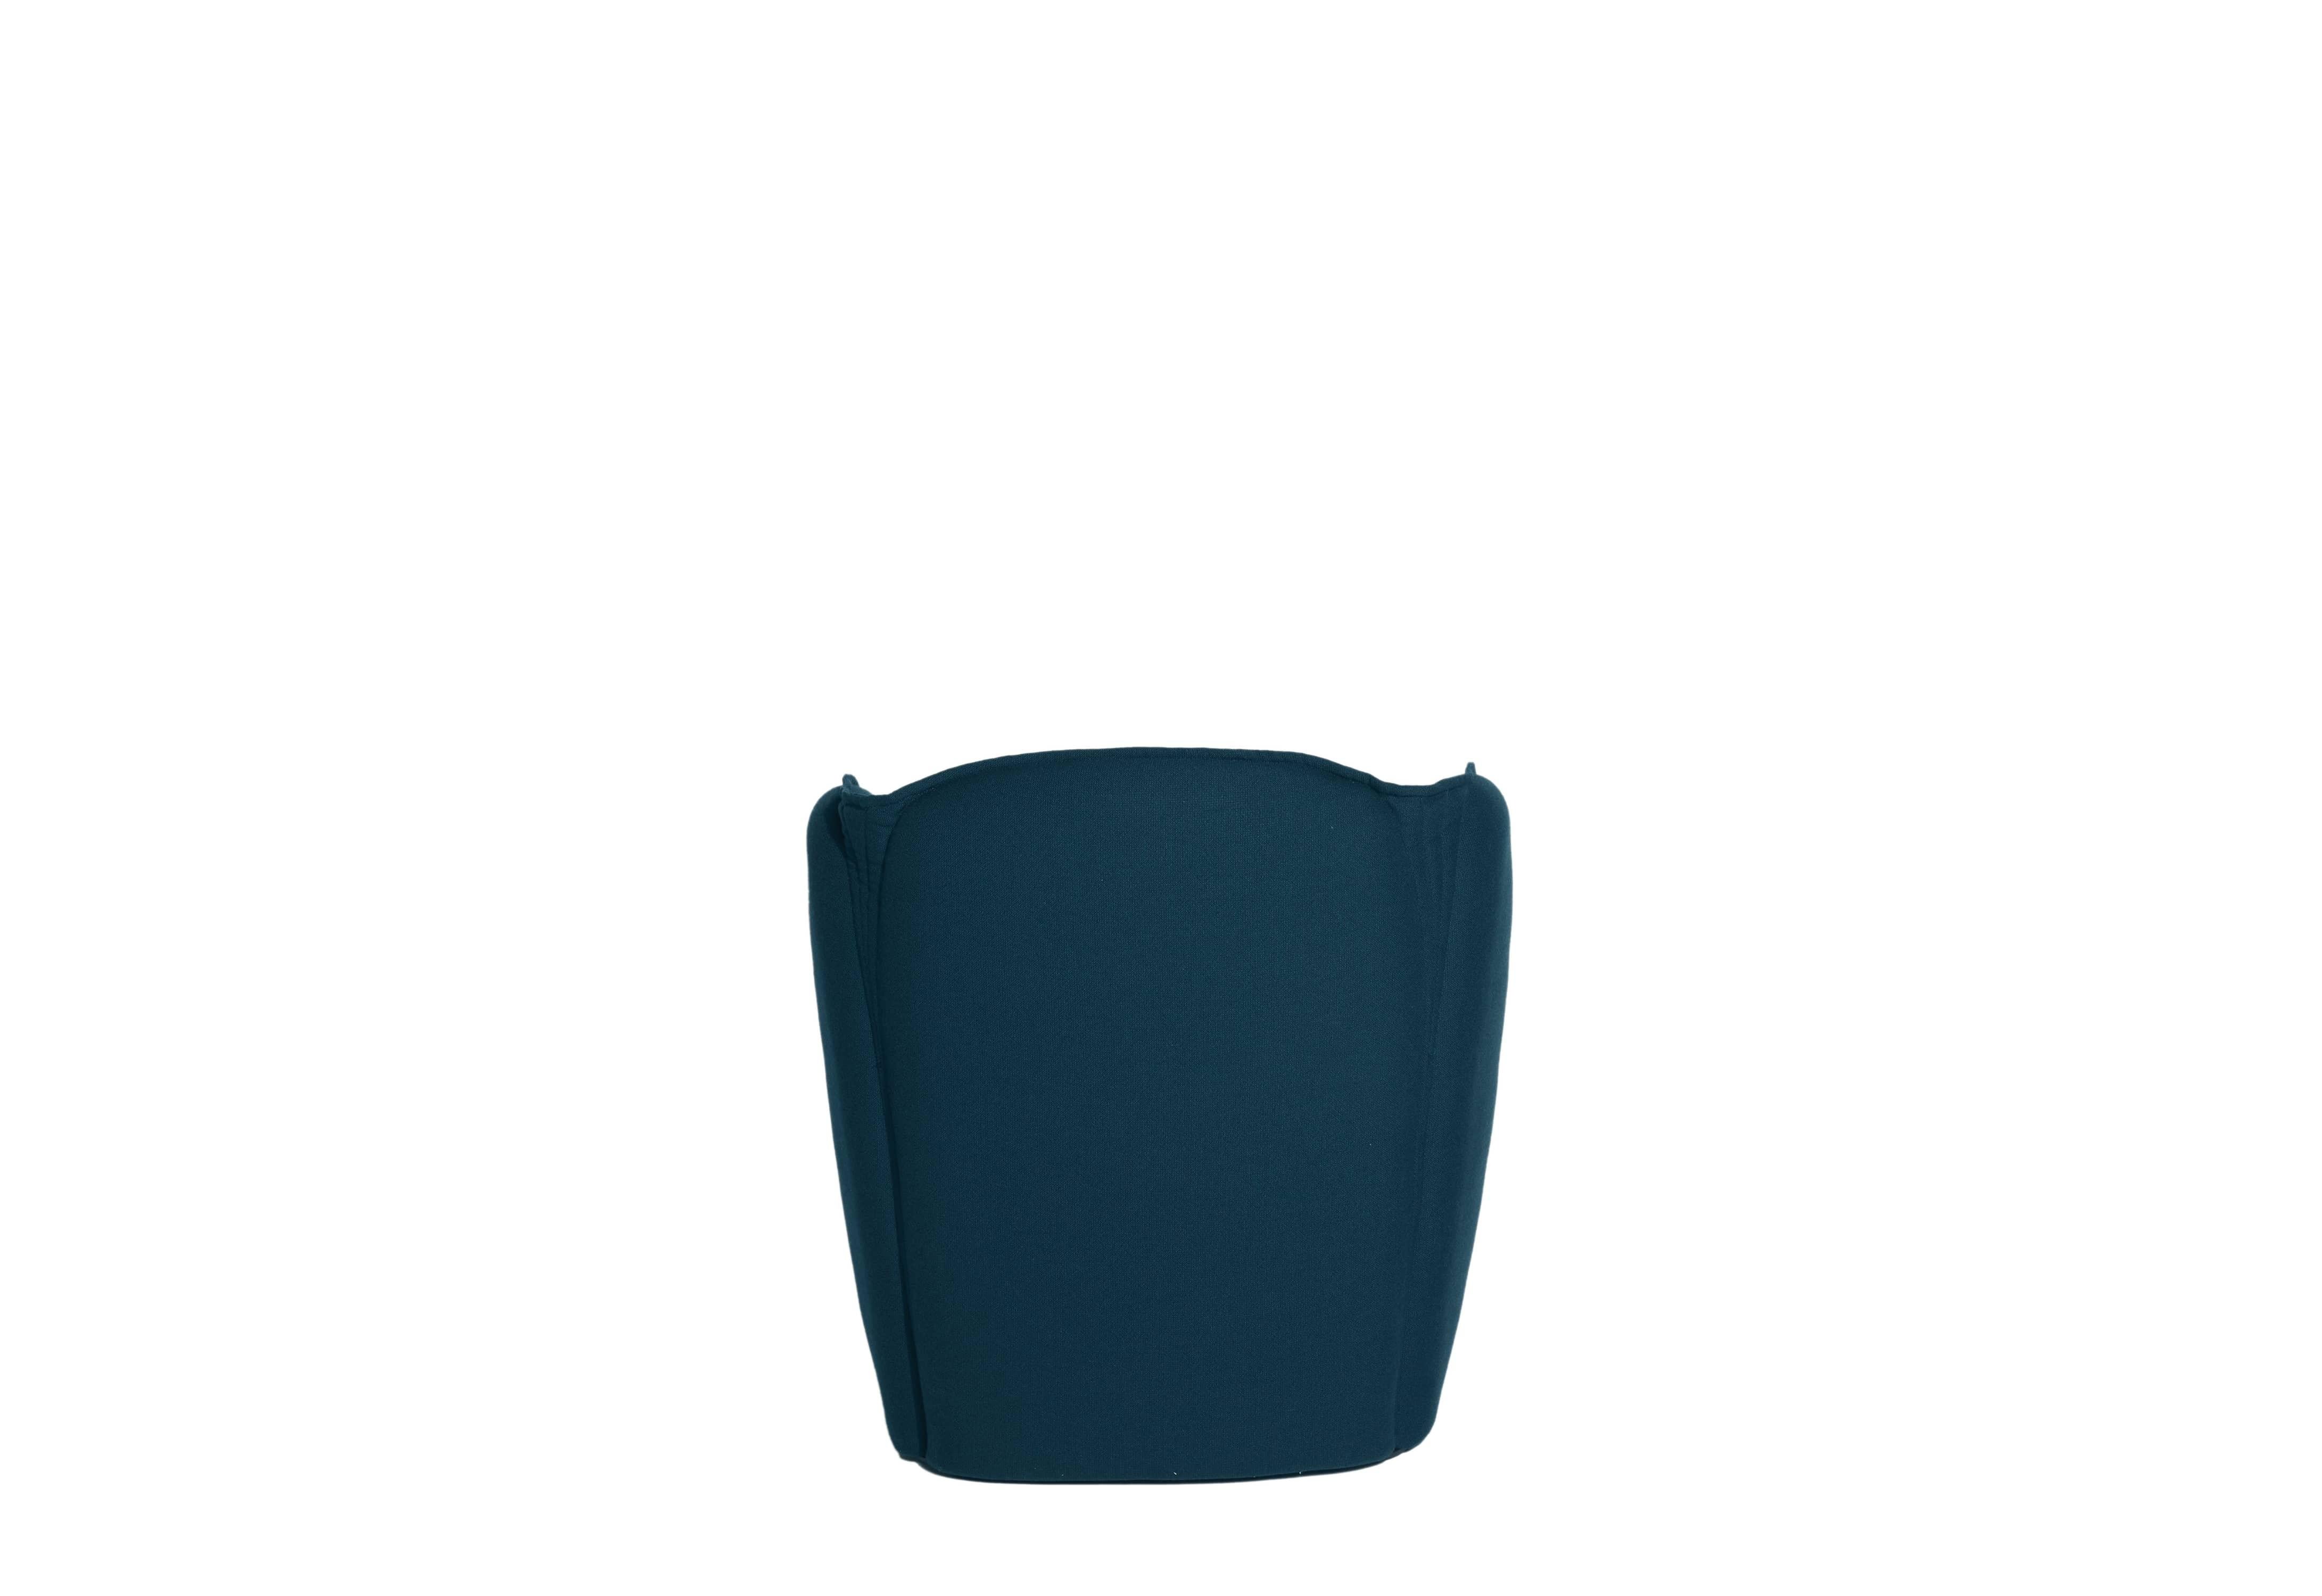 European Petite Friture Lily Armchair in Navy Blue by Färg & Blanche, 2022 For Sale